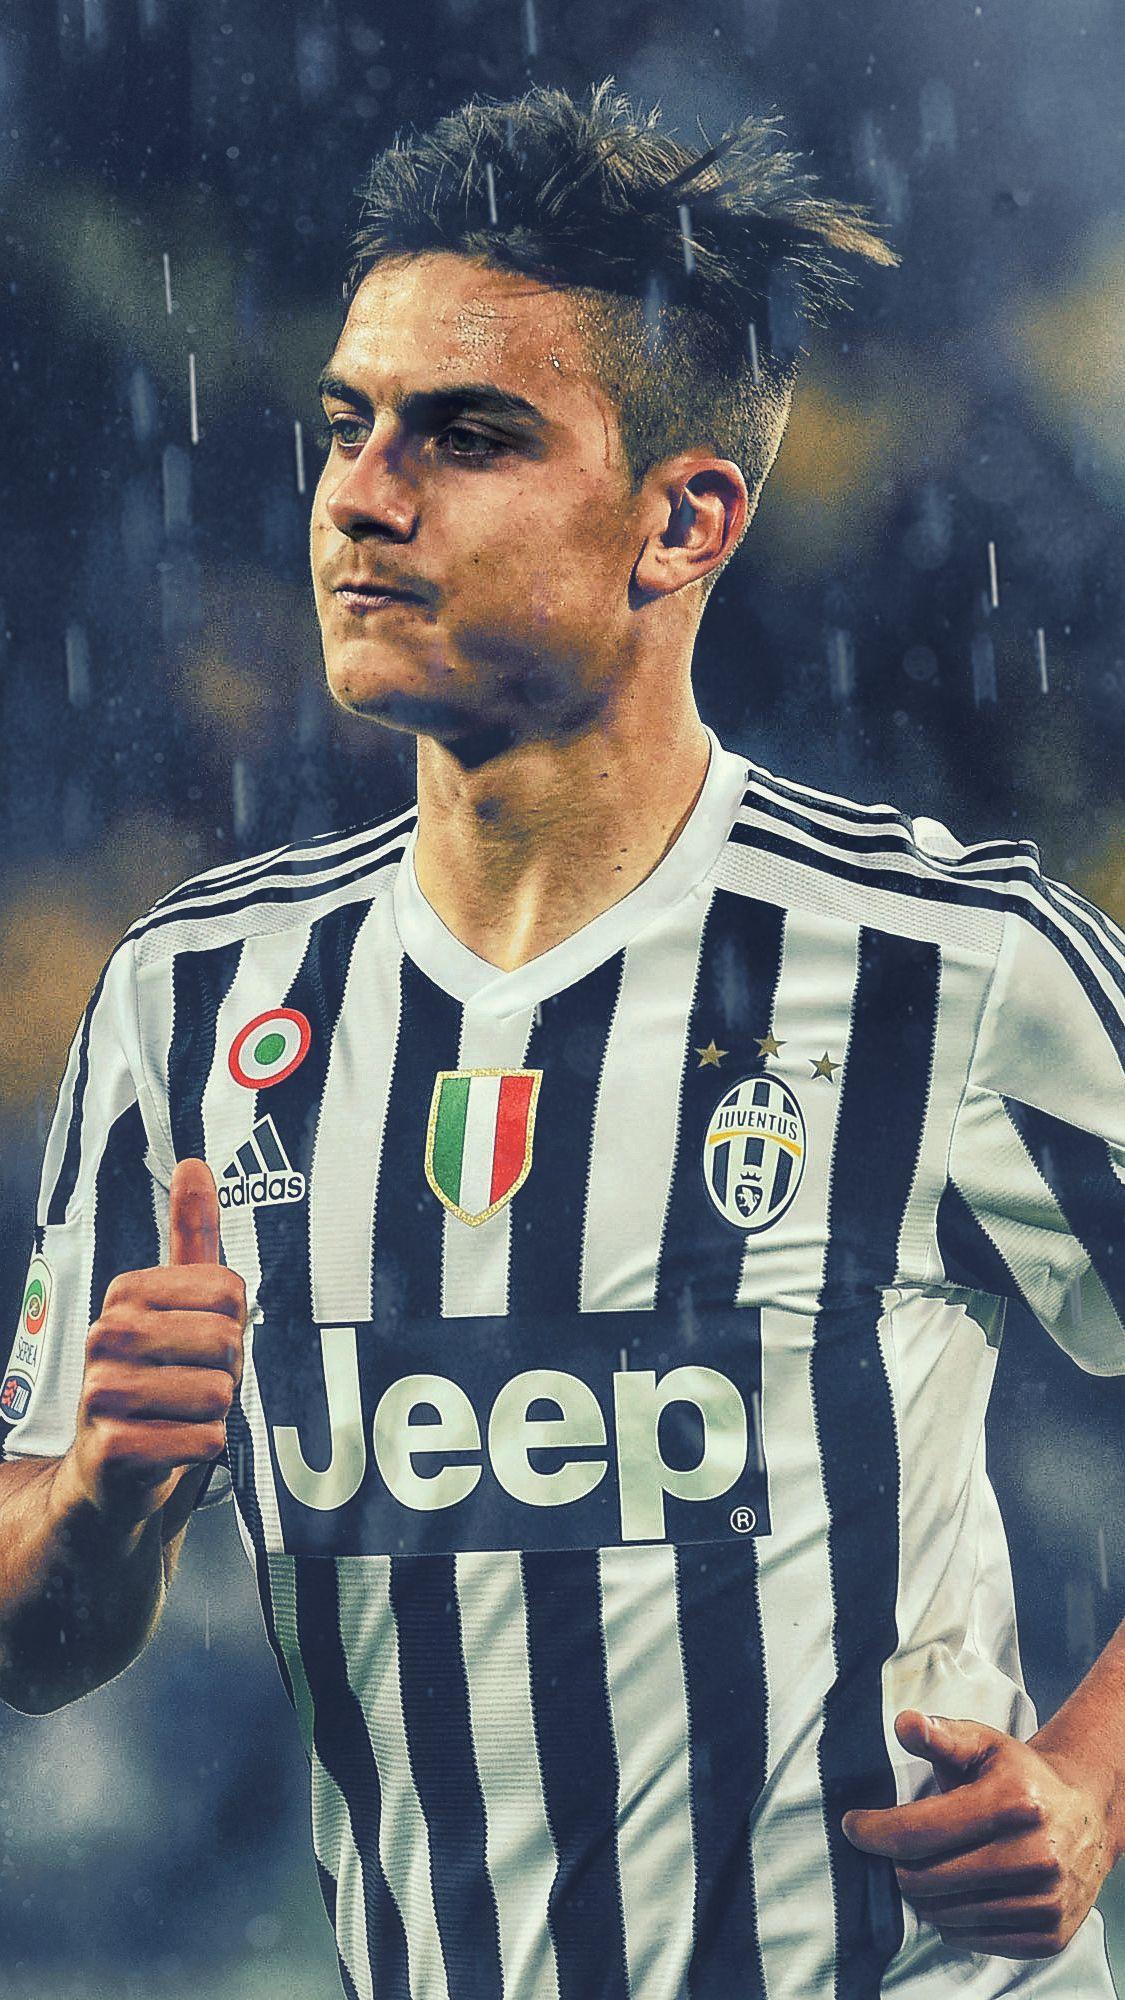 Dybala Wallpaper 2016 2017 Related Keywords & Suggestions